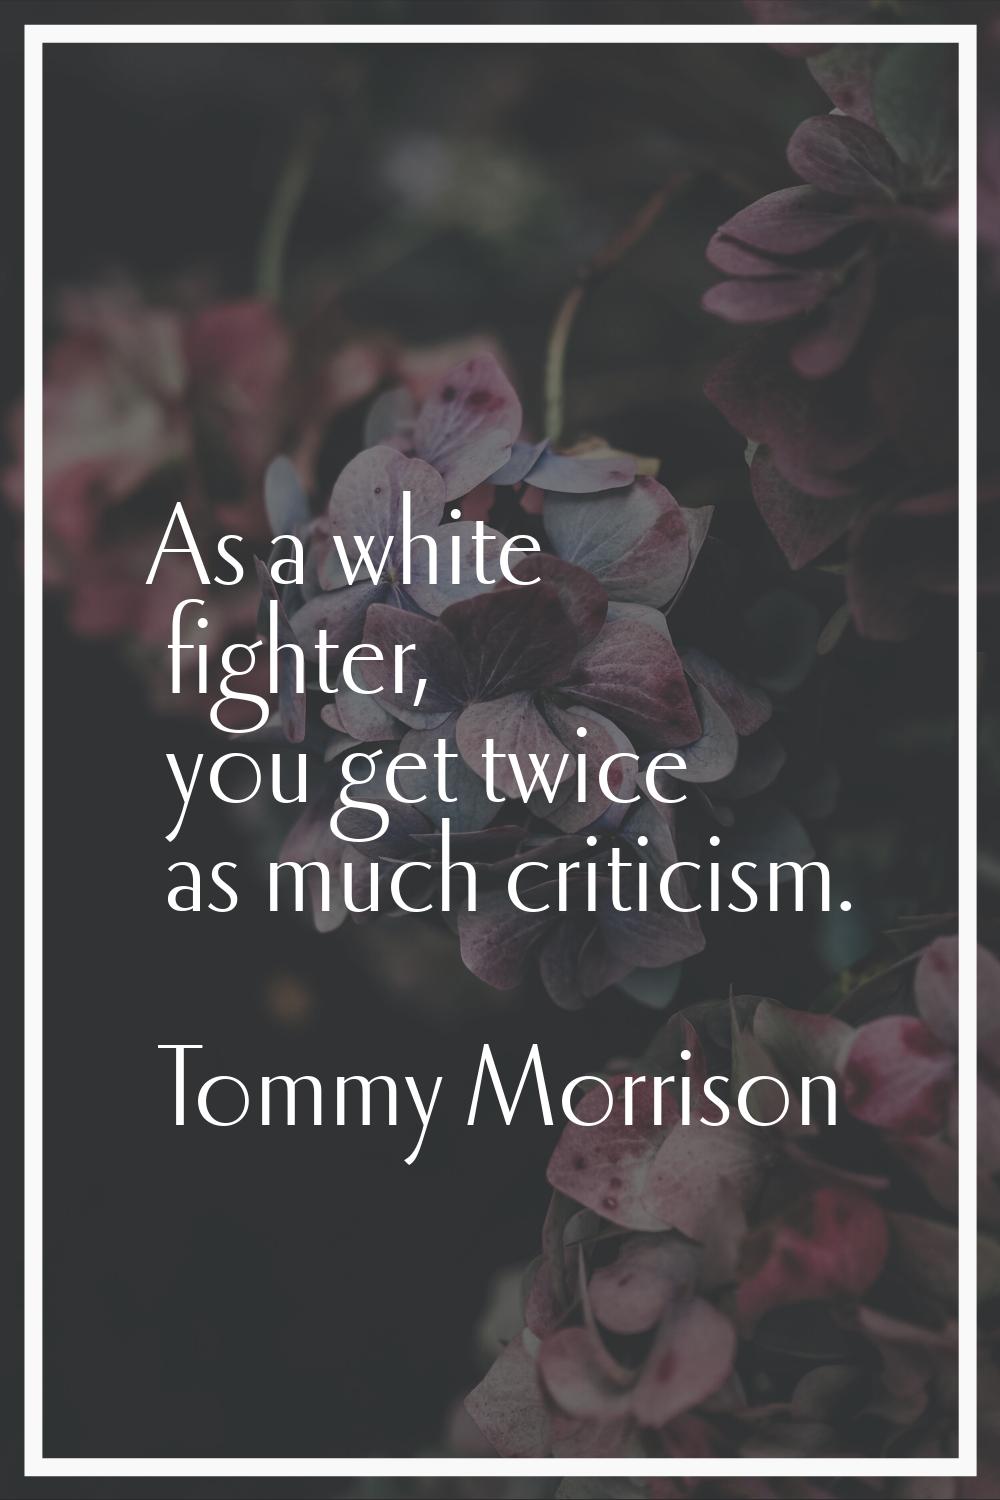 As a white fighter, you get twice as much criticism.